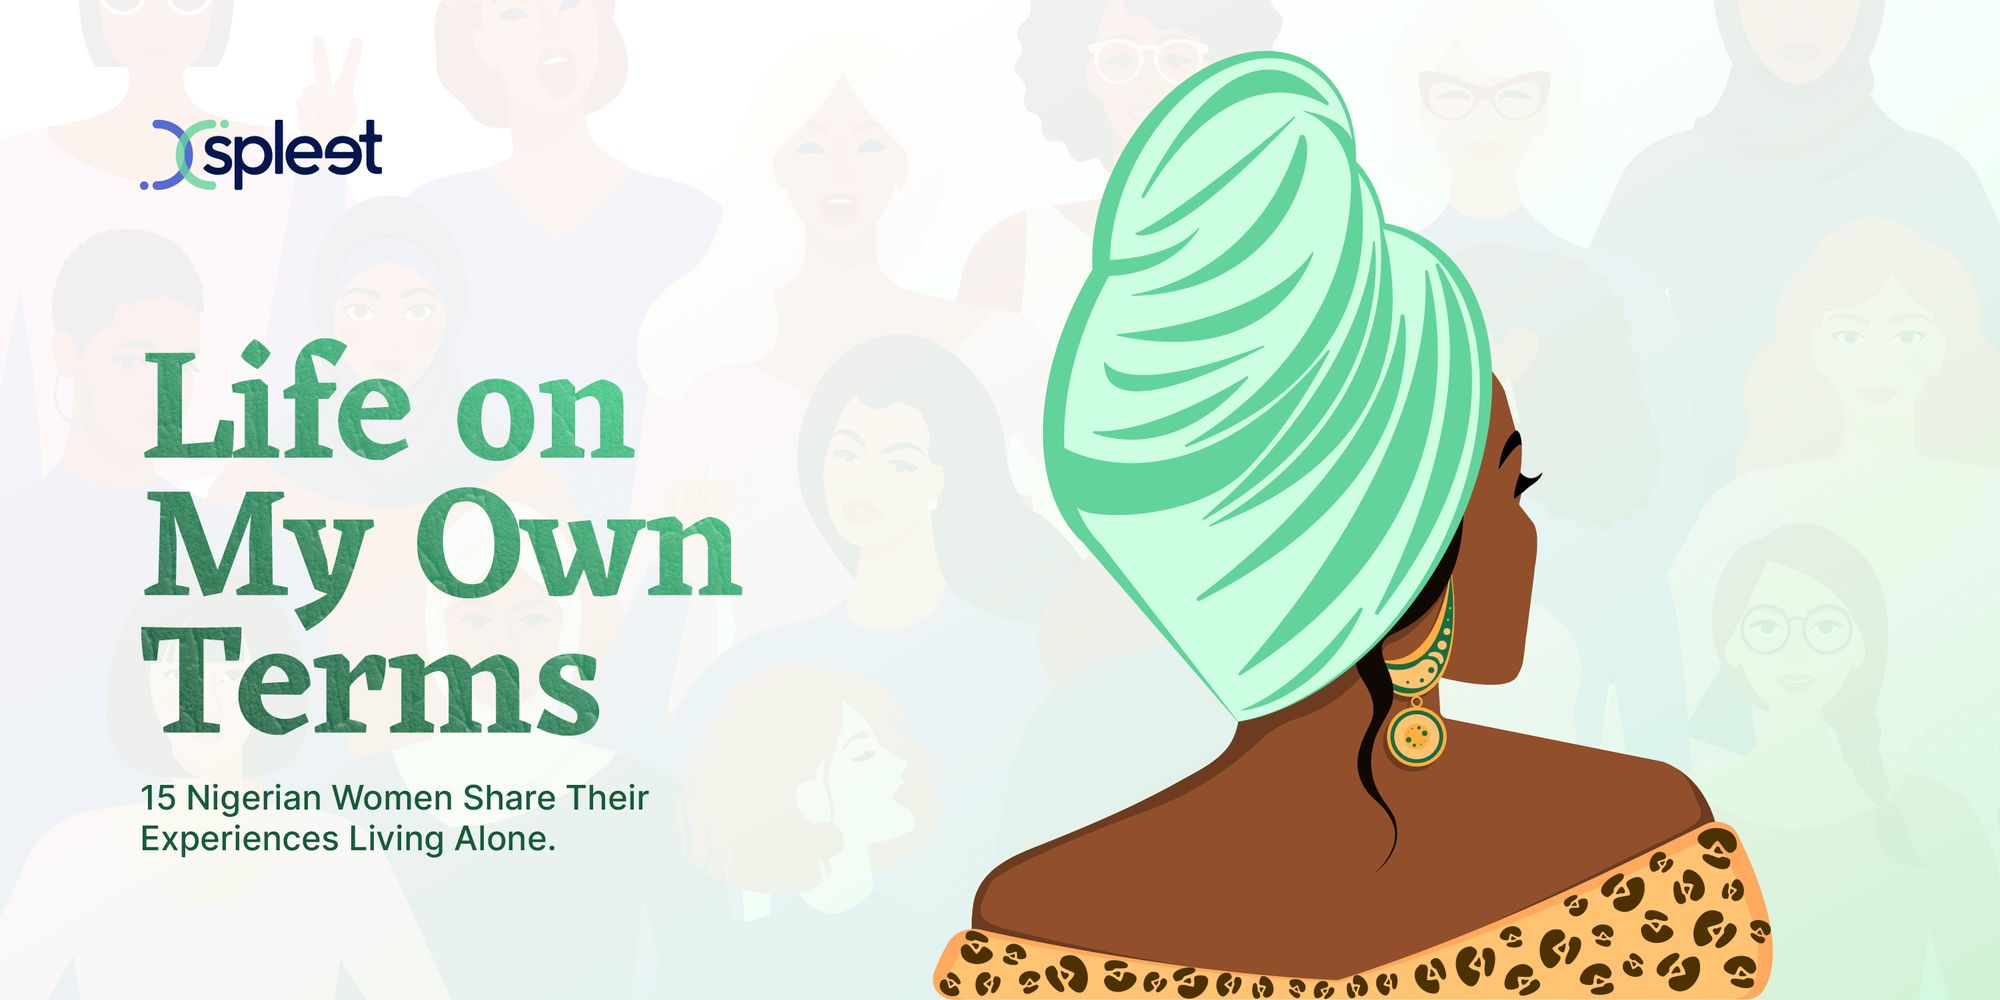 Life on My Own Terms: 15 Nigerian Women Share Their Experiences Living Alone